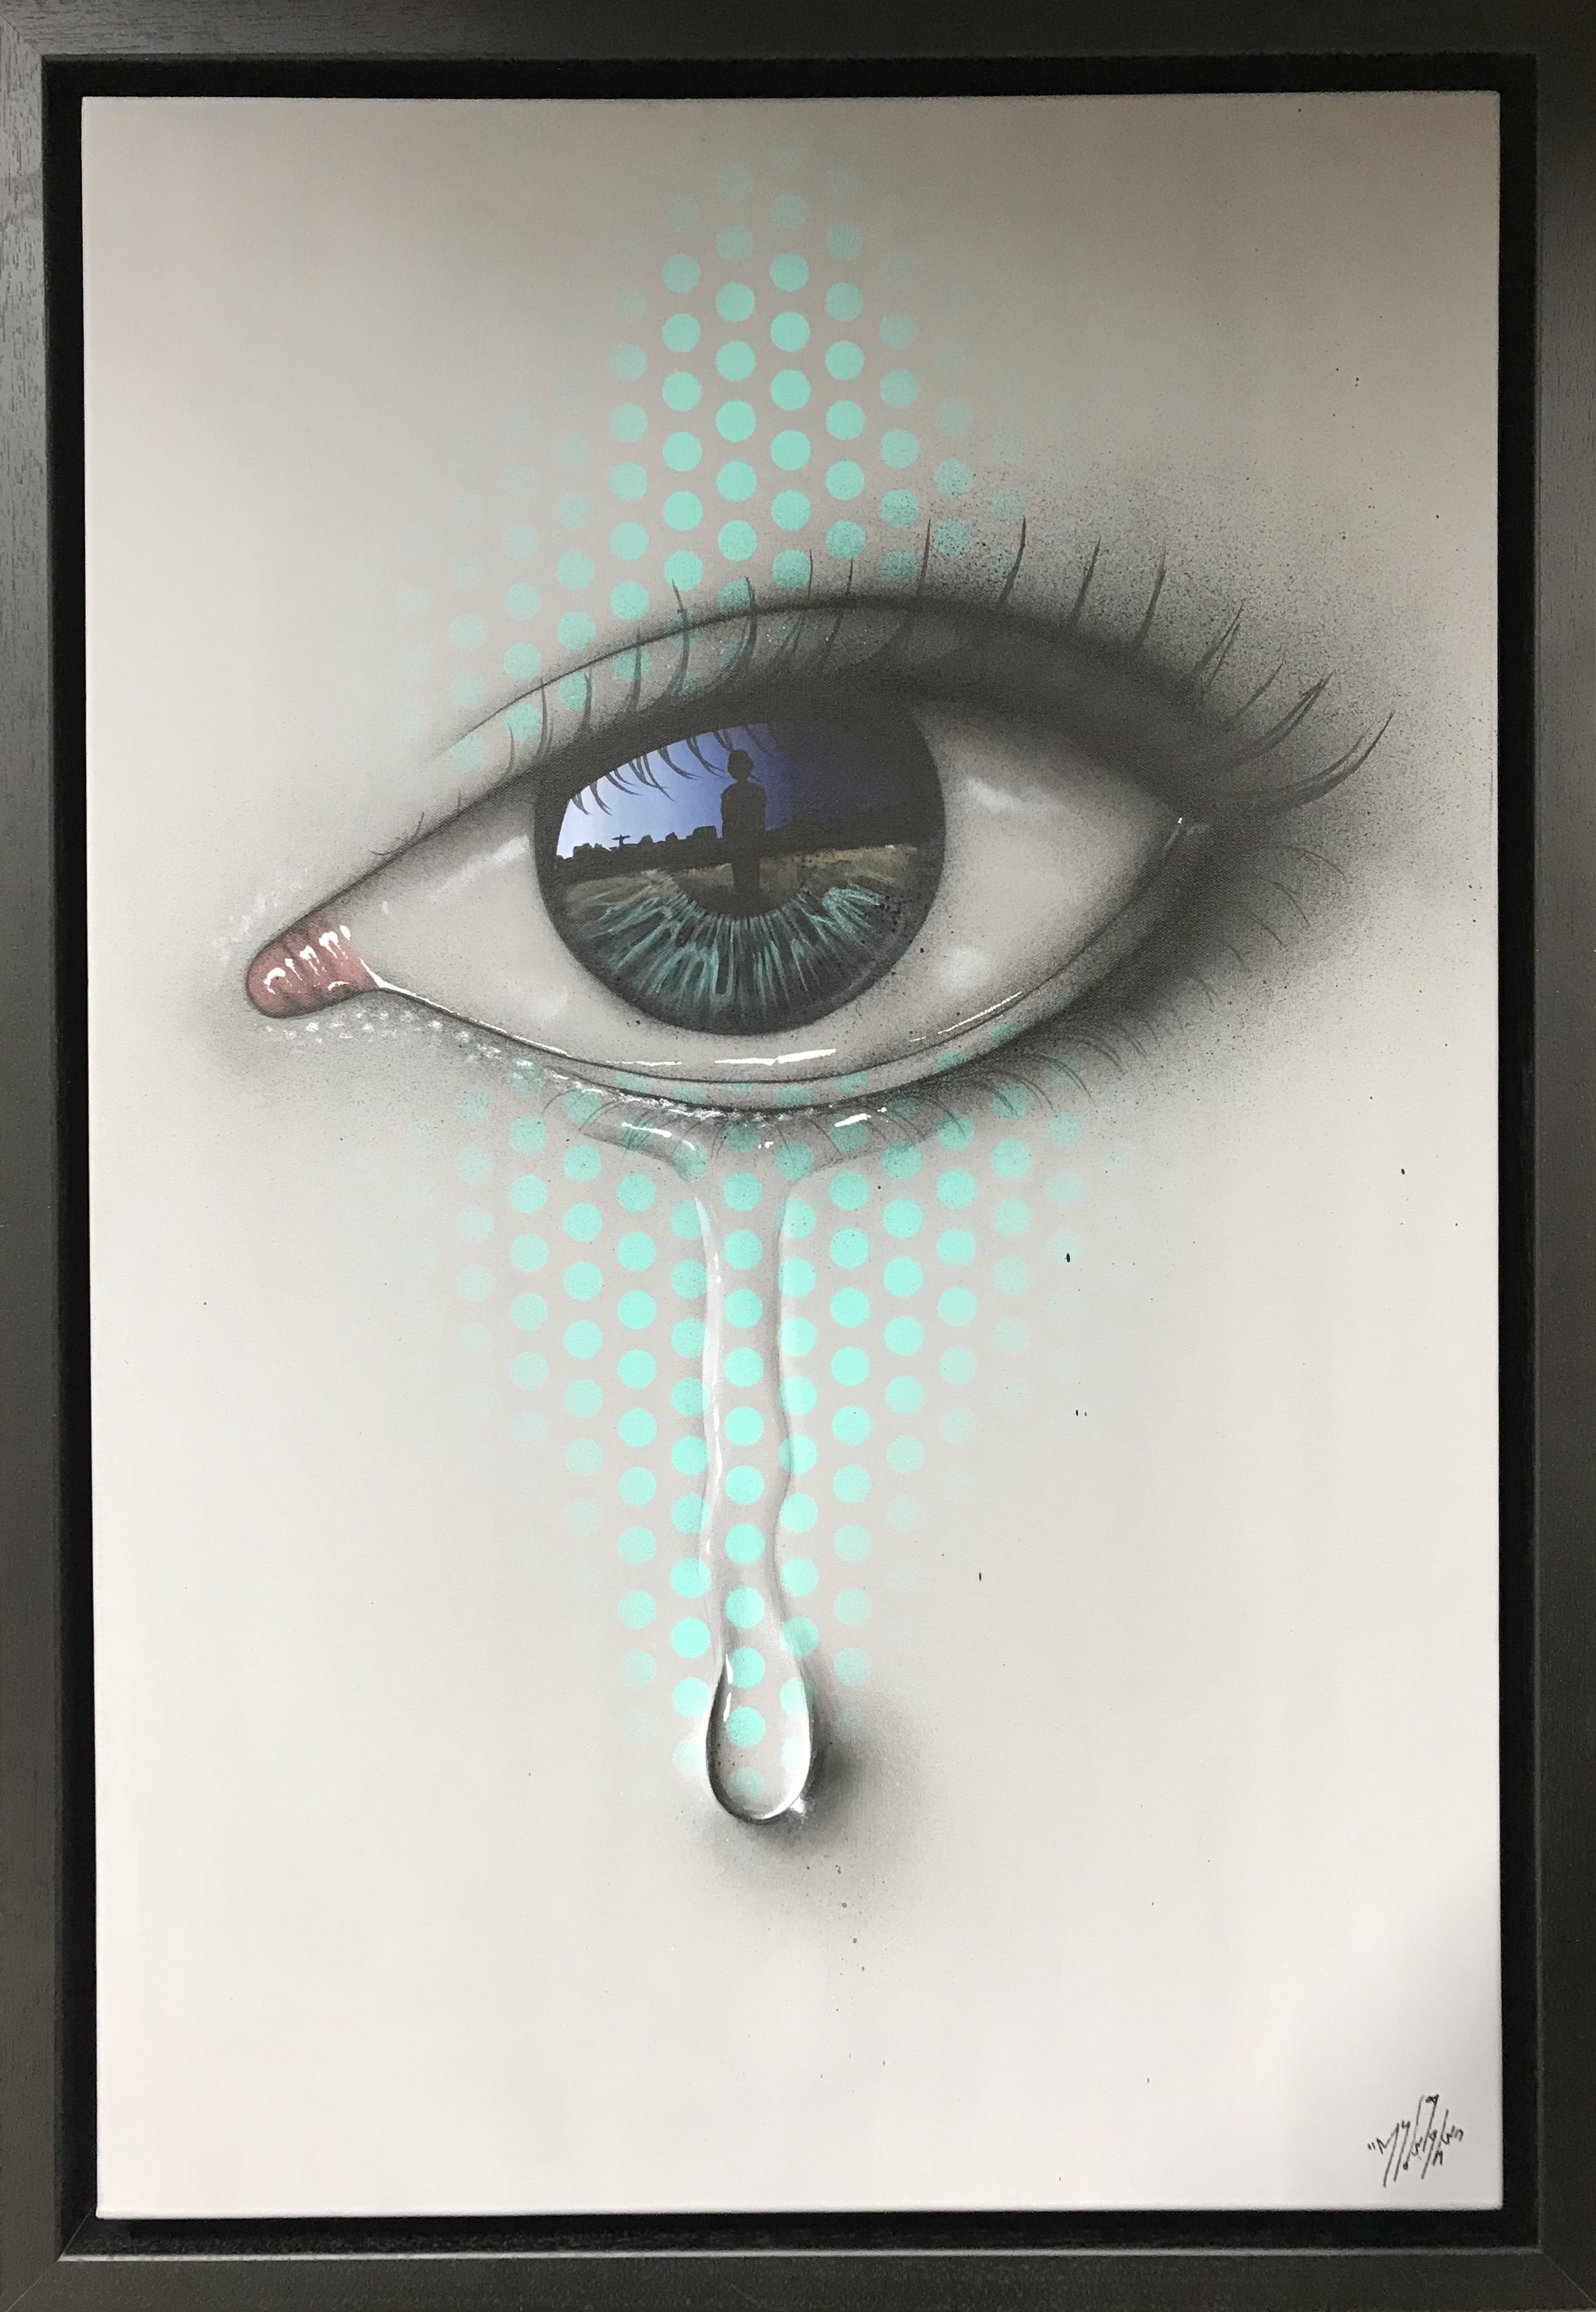 My Dog Sighs | You must of know